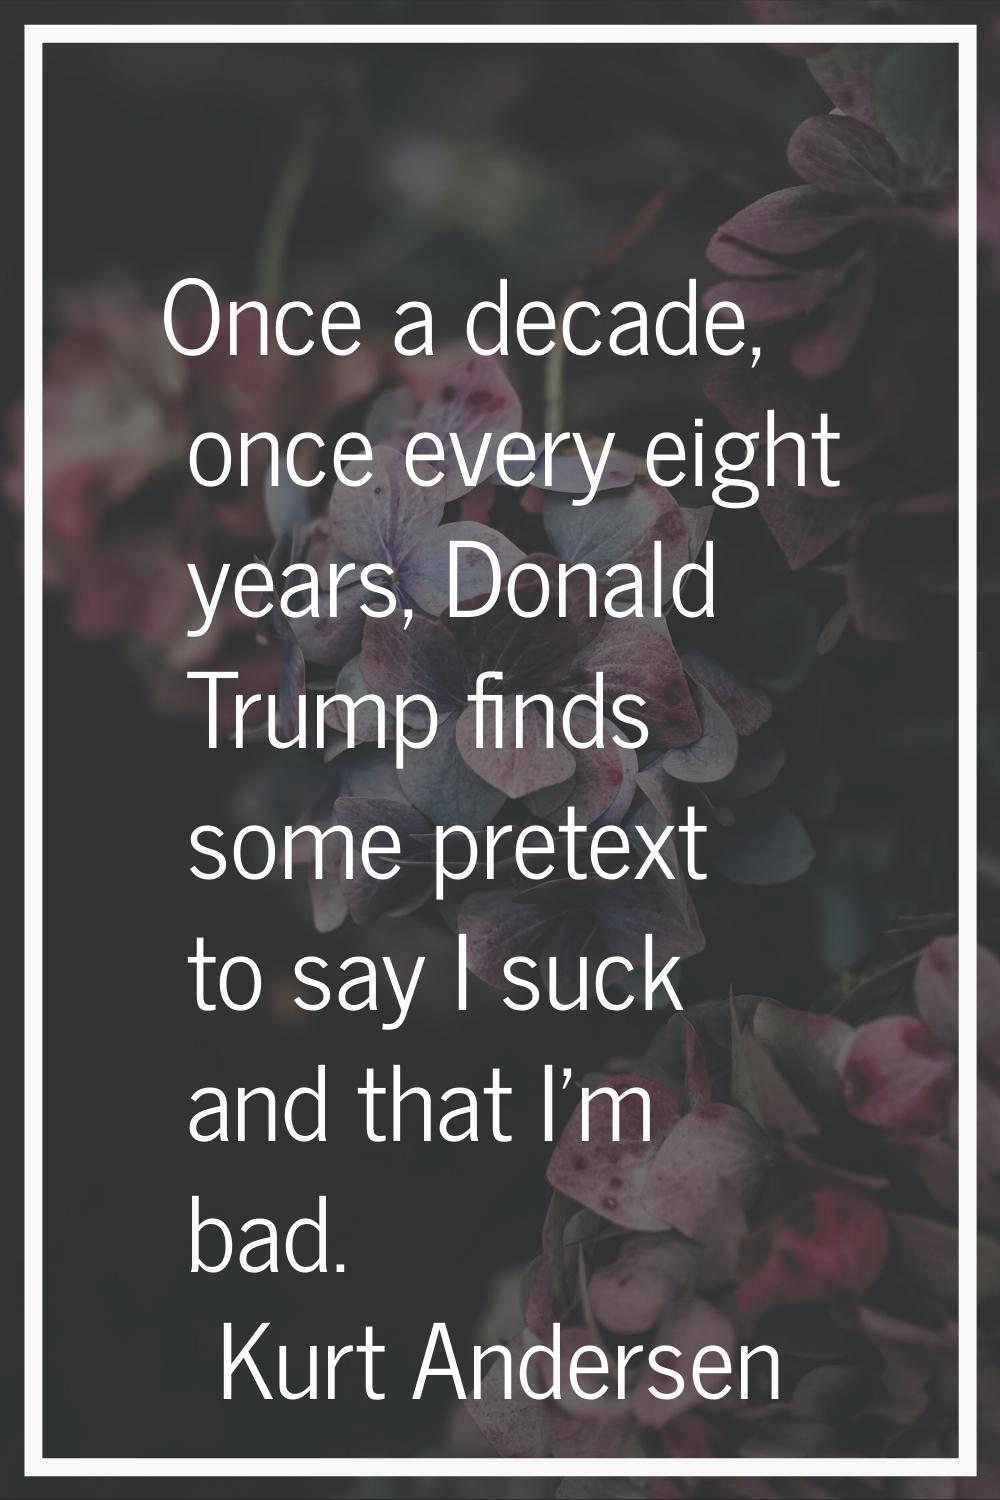 Once a decade, once every eight years, Donald Trump finds some pretext to say I suck and that I'm b